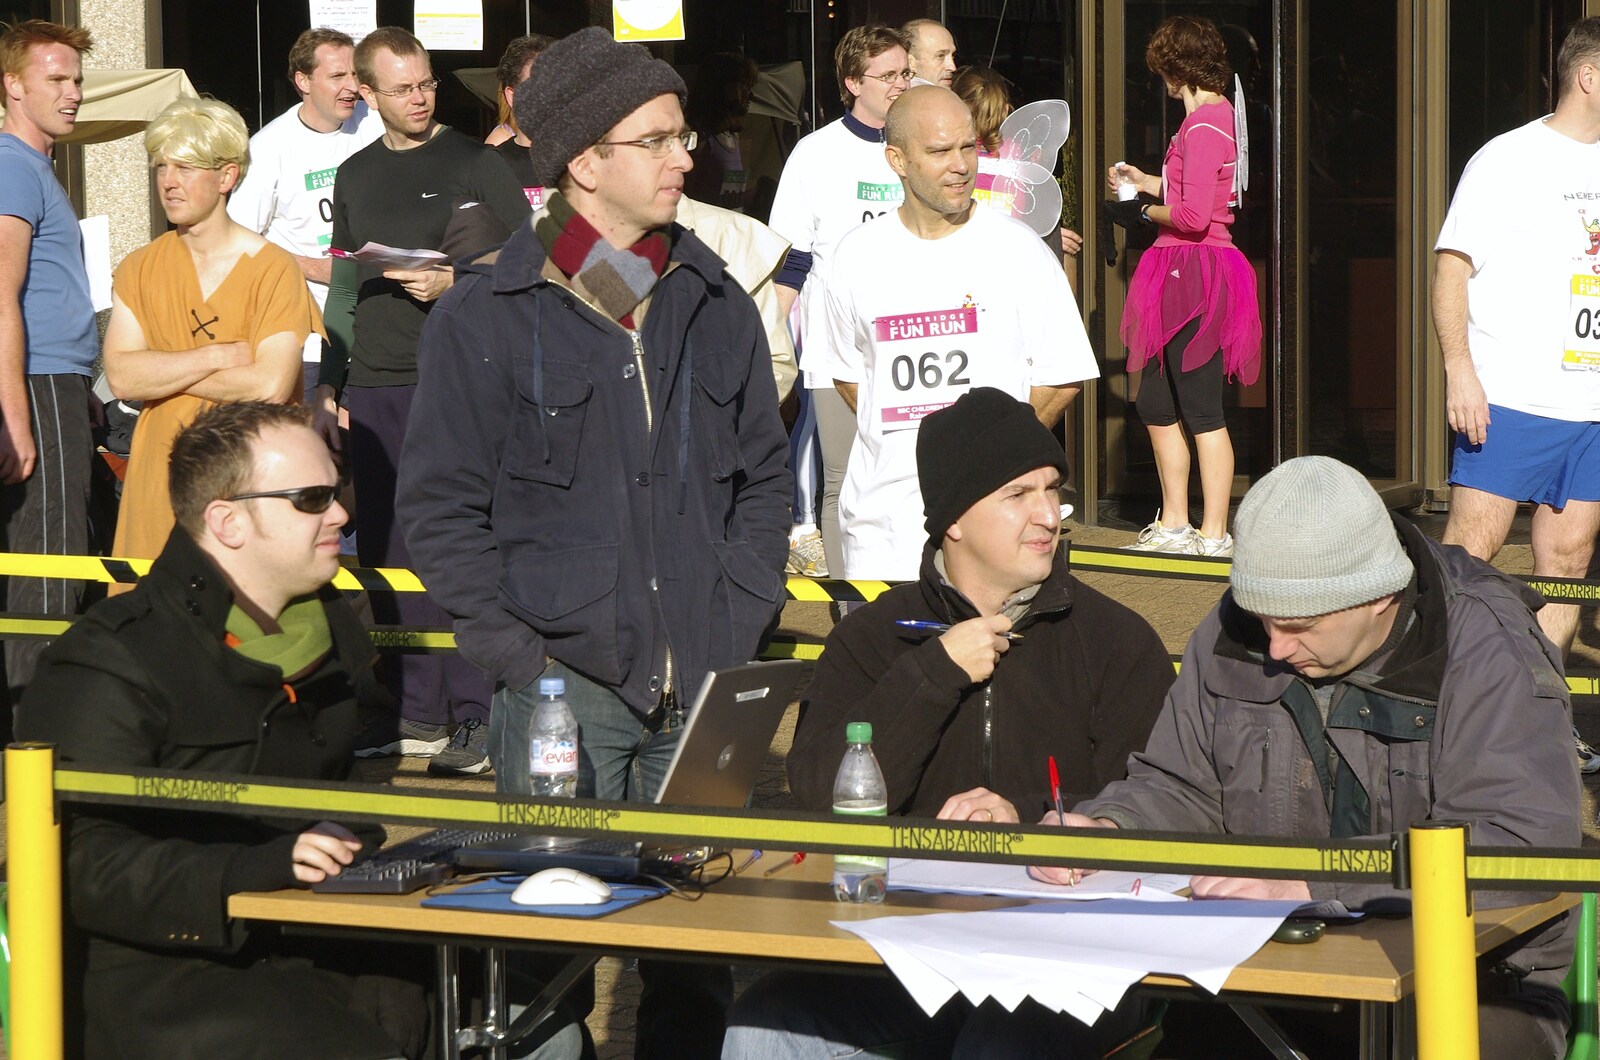 The timers and monitors from Isobel and the Science Park Fun Run, Milton Road, Cambridge - 16th November 2007